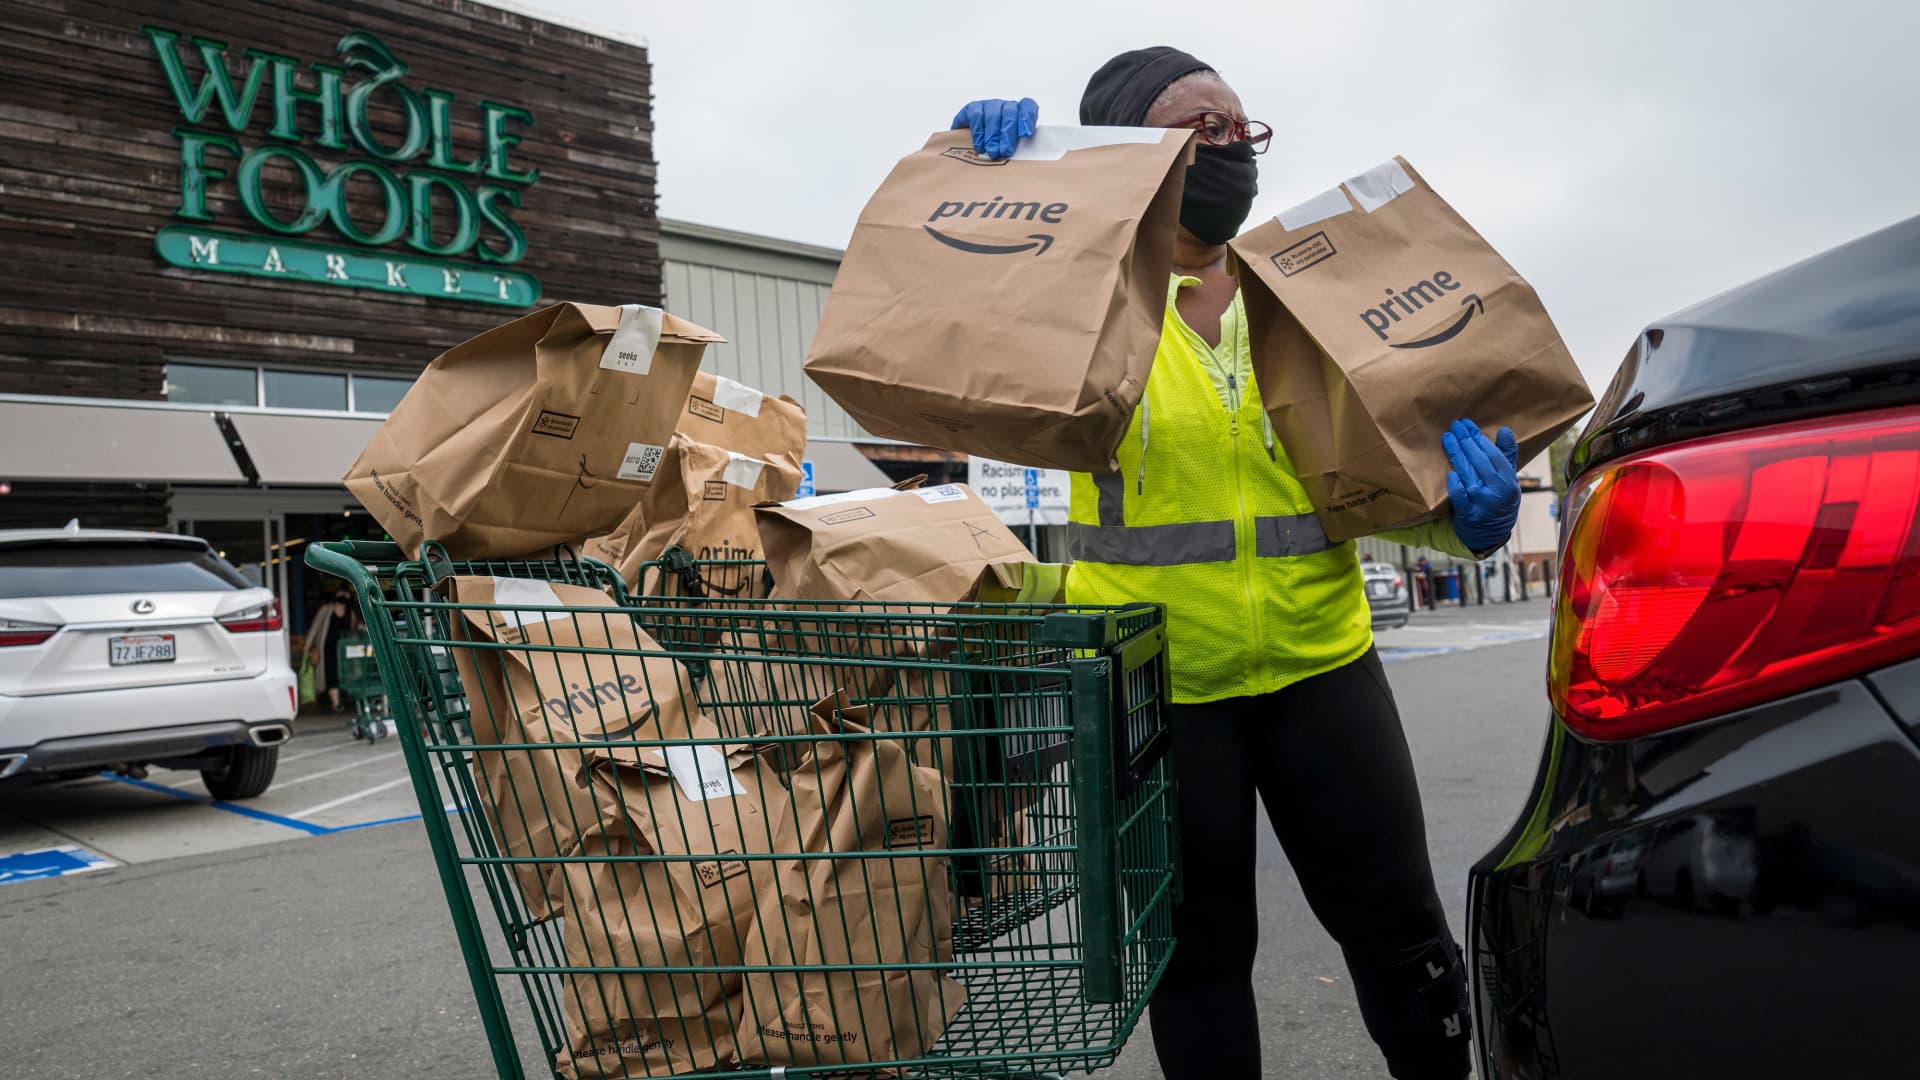 Amazon bought Whole Foods five years ago for $13.7 billion. Here’s what’s change..